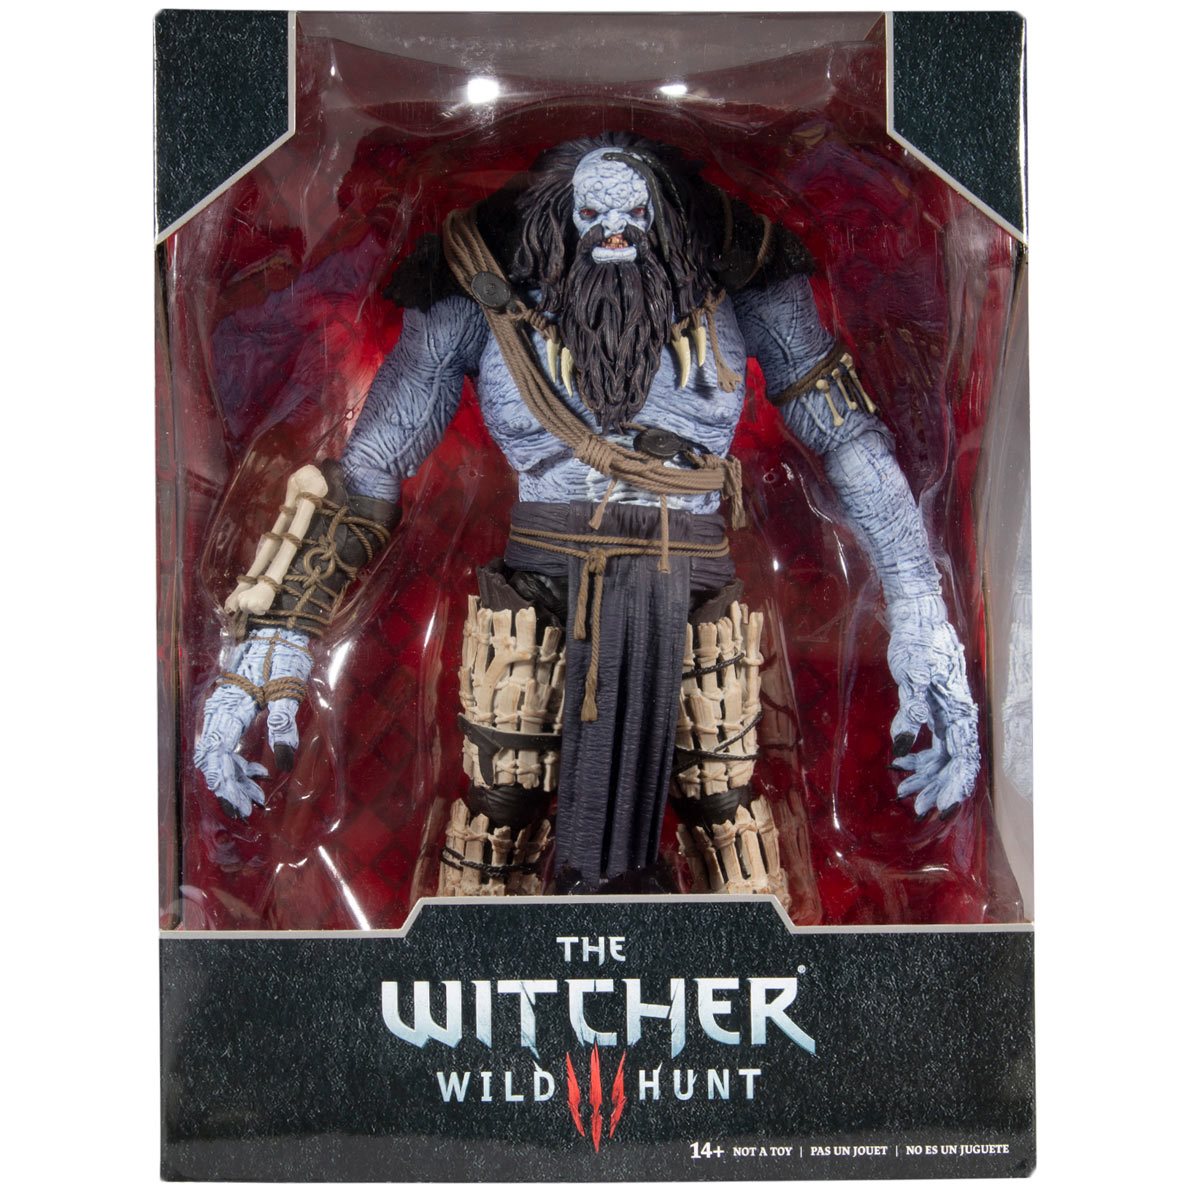 Witcher Gaming Myrhyff The Ice Giant of Undvik Megafig 12-Inch Action Figure